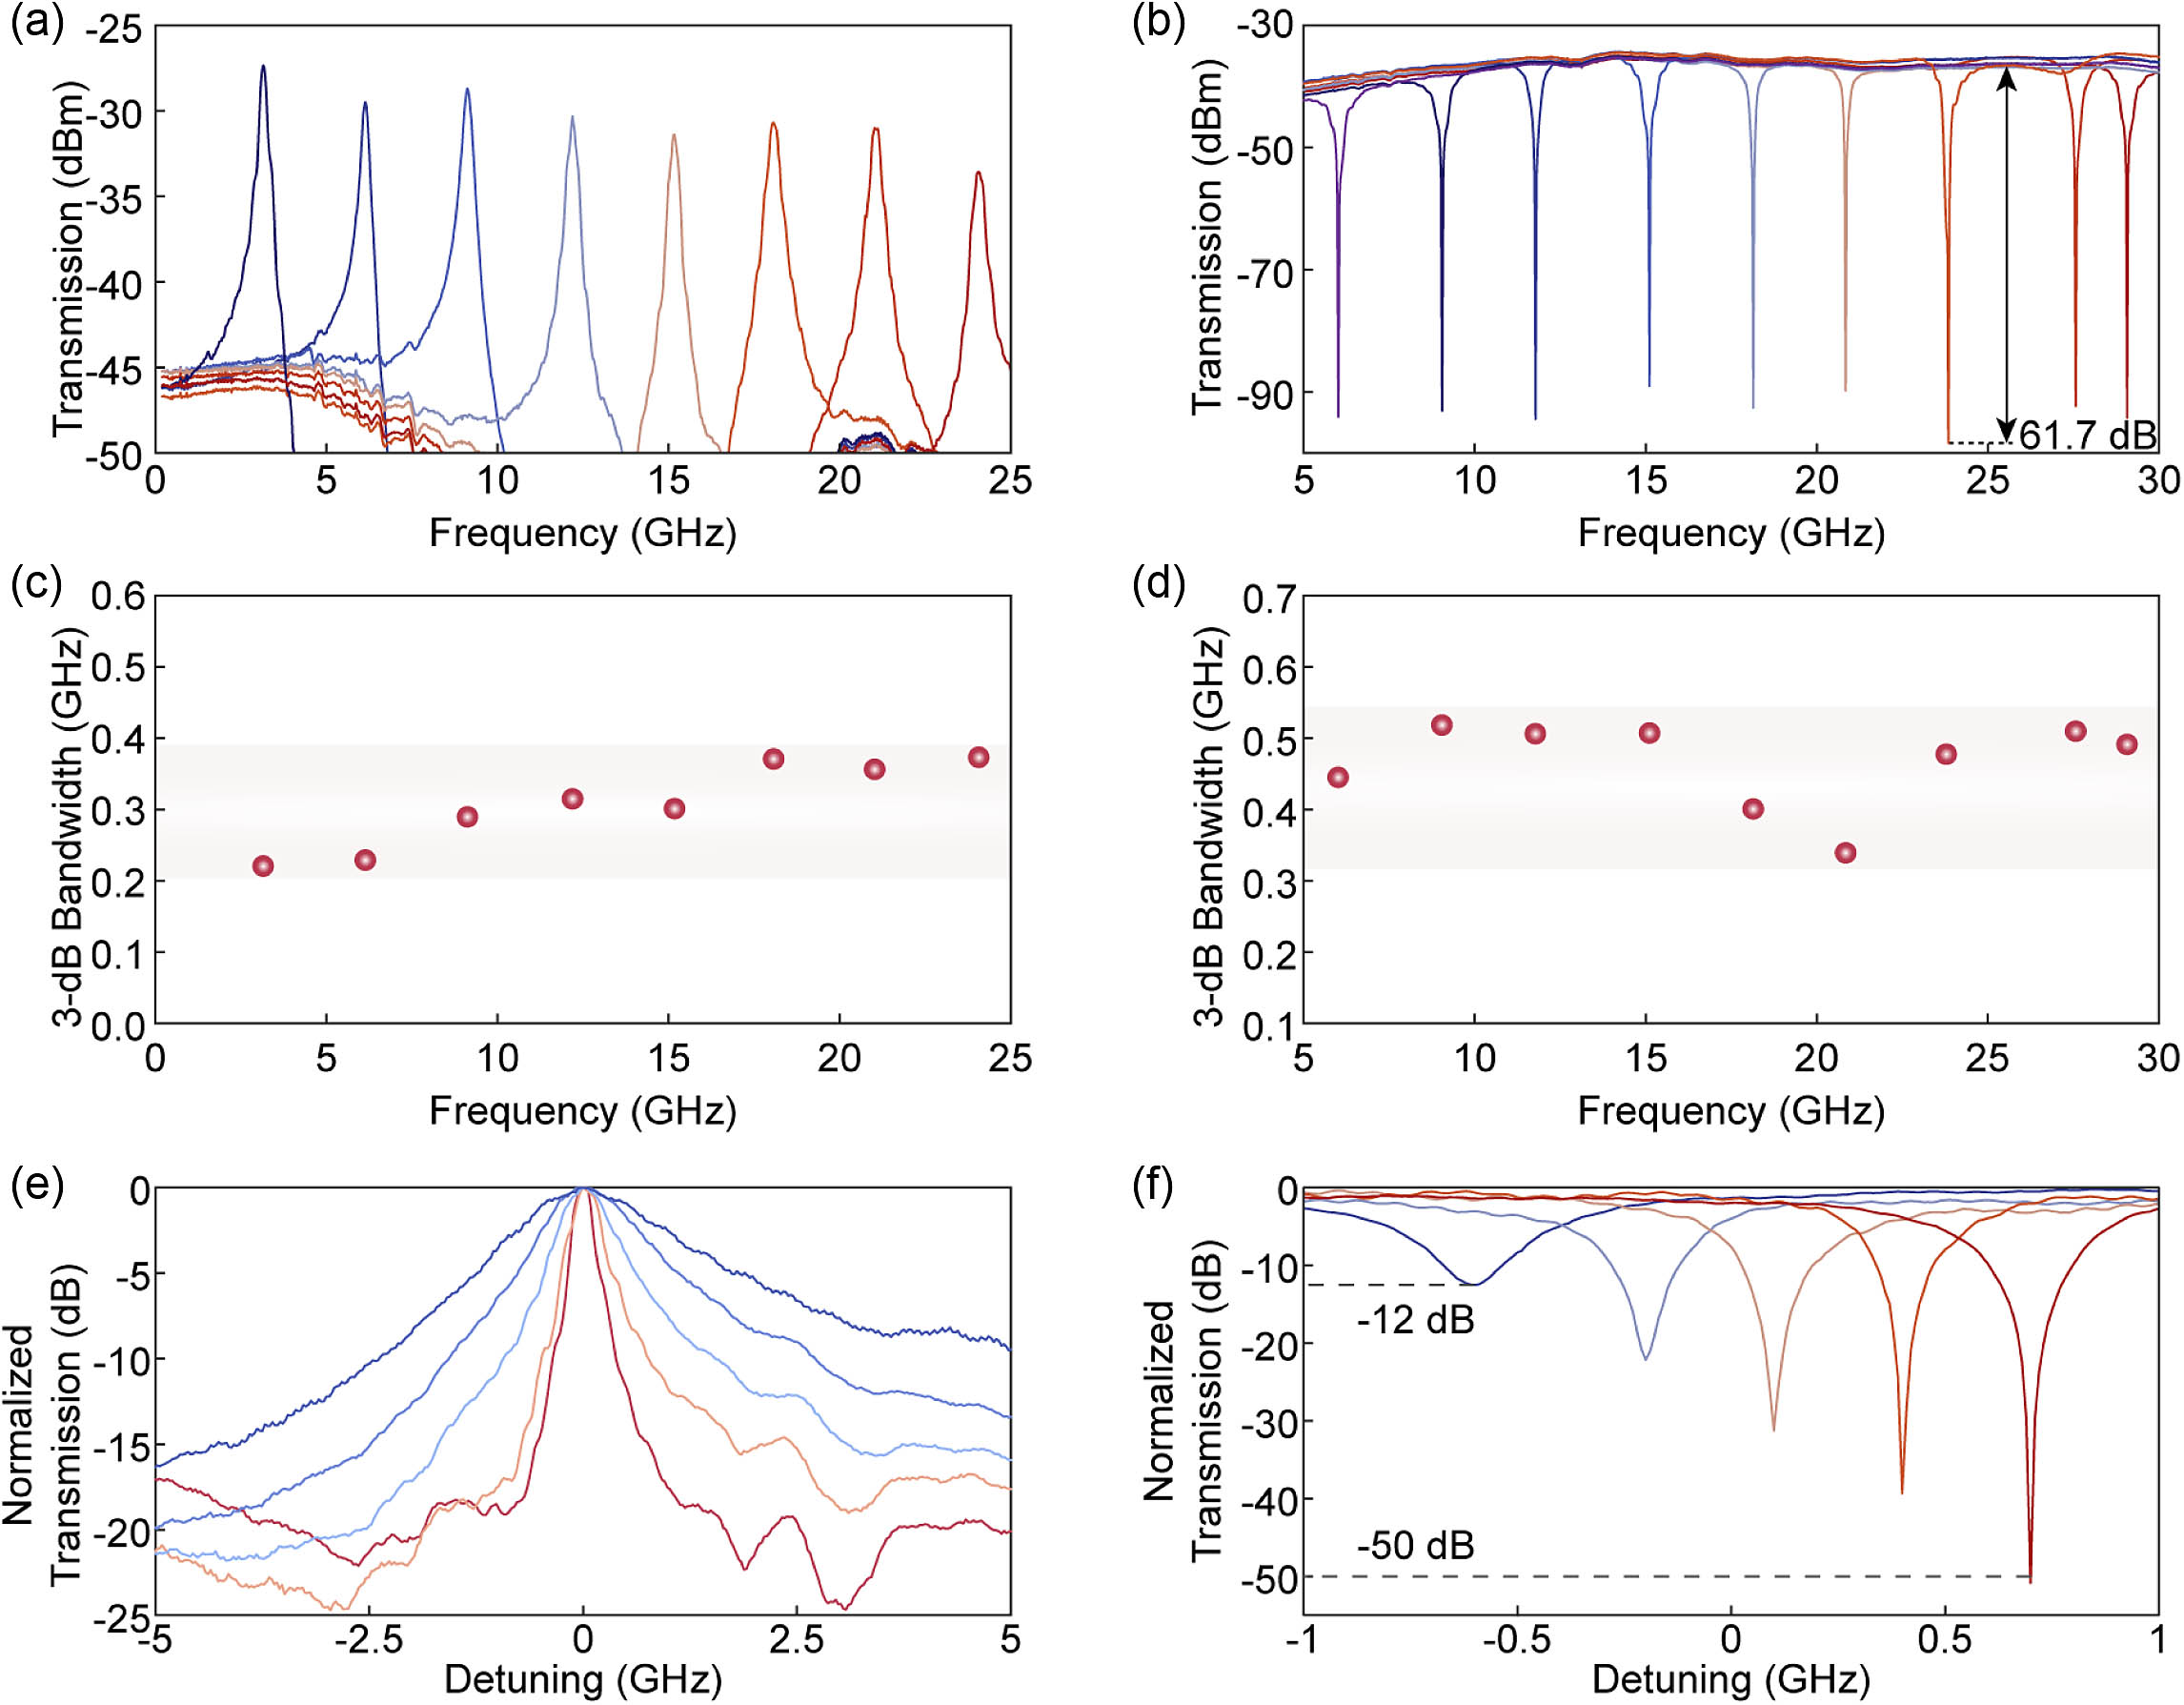 Measured results of the S21 response of the proposed IMPF. (a) and (c) Measured S21 response of the bandpass filter (BPF) with the central frequency tuned from 3 GHz to 24 GHz and the corresponding 3 dB bandwidths. (b) and (d) Measured S21 response of the band-stop filter (BSF) with the central frequency tuned from 5 GHz to 30 GHz and the corresponding 3 dB bandwidths. (e) The demonstration of the bandwidth reconfigurability via applying various voltages on the microheater on one arm of the AMZI. The bandwidth is tuned from 250 MHz to 2.07 GHz. (f) The demonstration of the RR reconfigurability. The RR is tuned from 12 dB to 50 dB. Additionally, the fluctuations of the bandwidth are within 170 MHz (from 360 MHz to 530 MHz). For better observation, each peak is intentionally detuned by a certain frequency when plotted. Other test results, such as dynamic range, can be found in Appendix C.